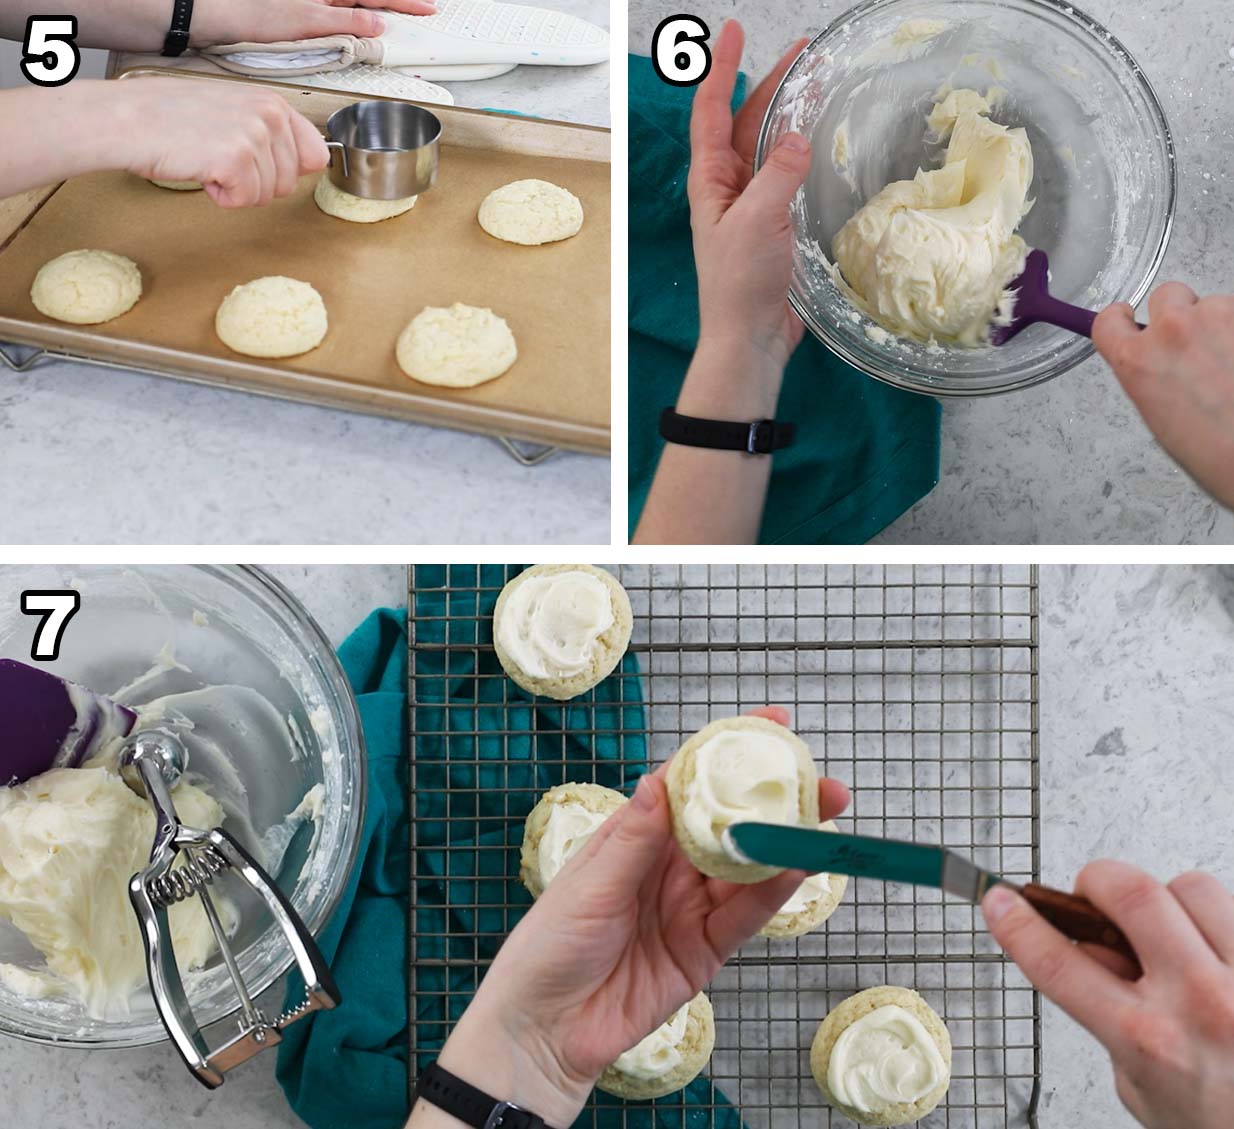 3-image collage showing steps to flatten and frost sour cream cookies